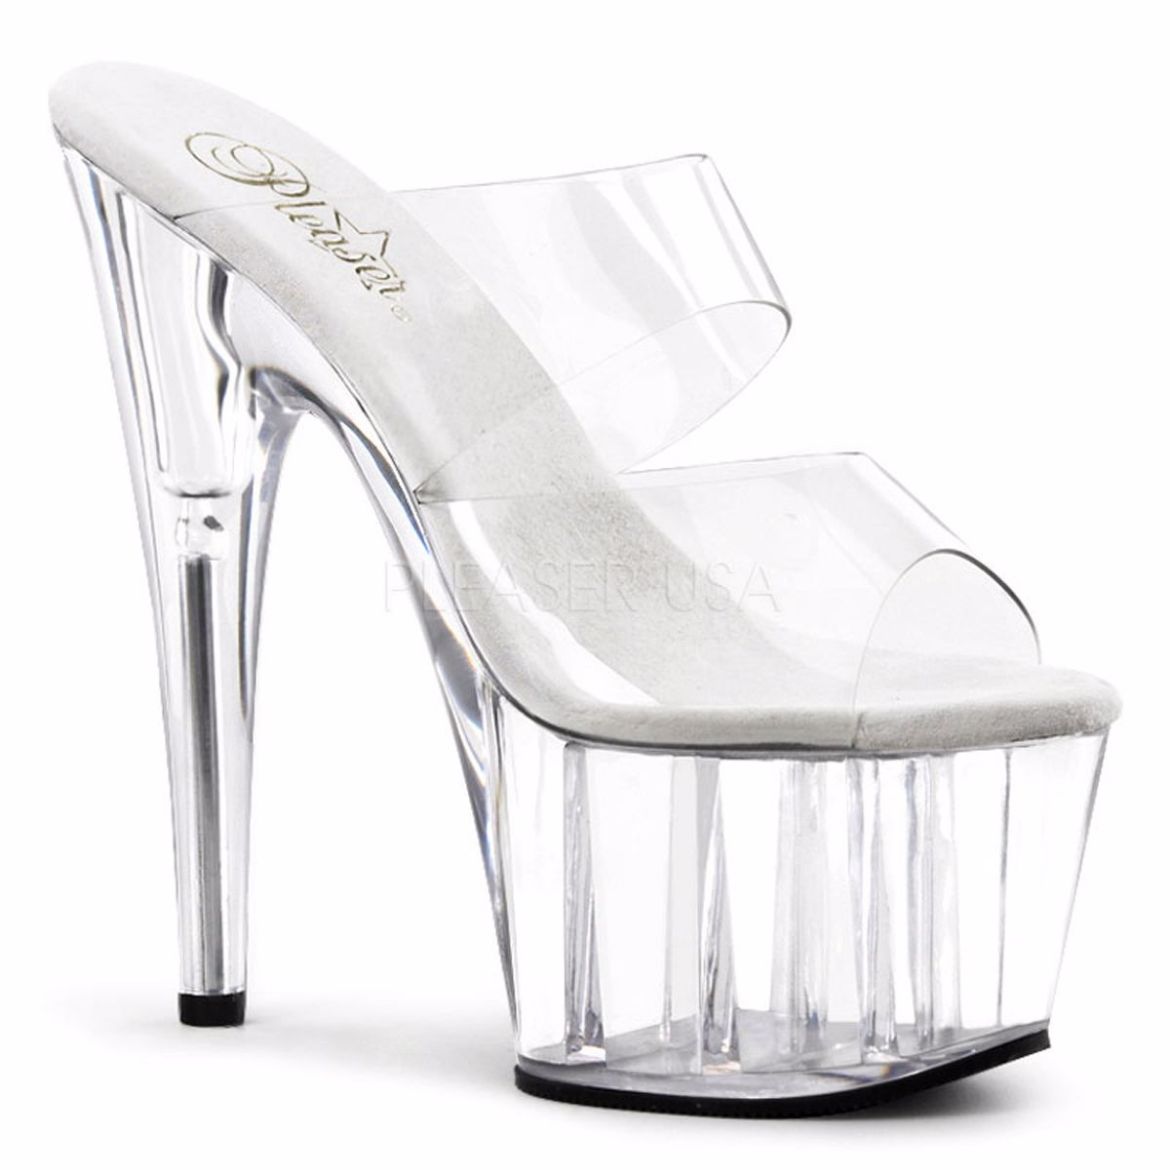 Product image of Pleaser Adore-702 Clear/Clear, 7 inch (17.8 cm) Heel, 2 3/4 inch (7 cm) Platform Slide Mule Shoes